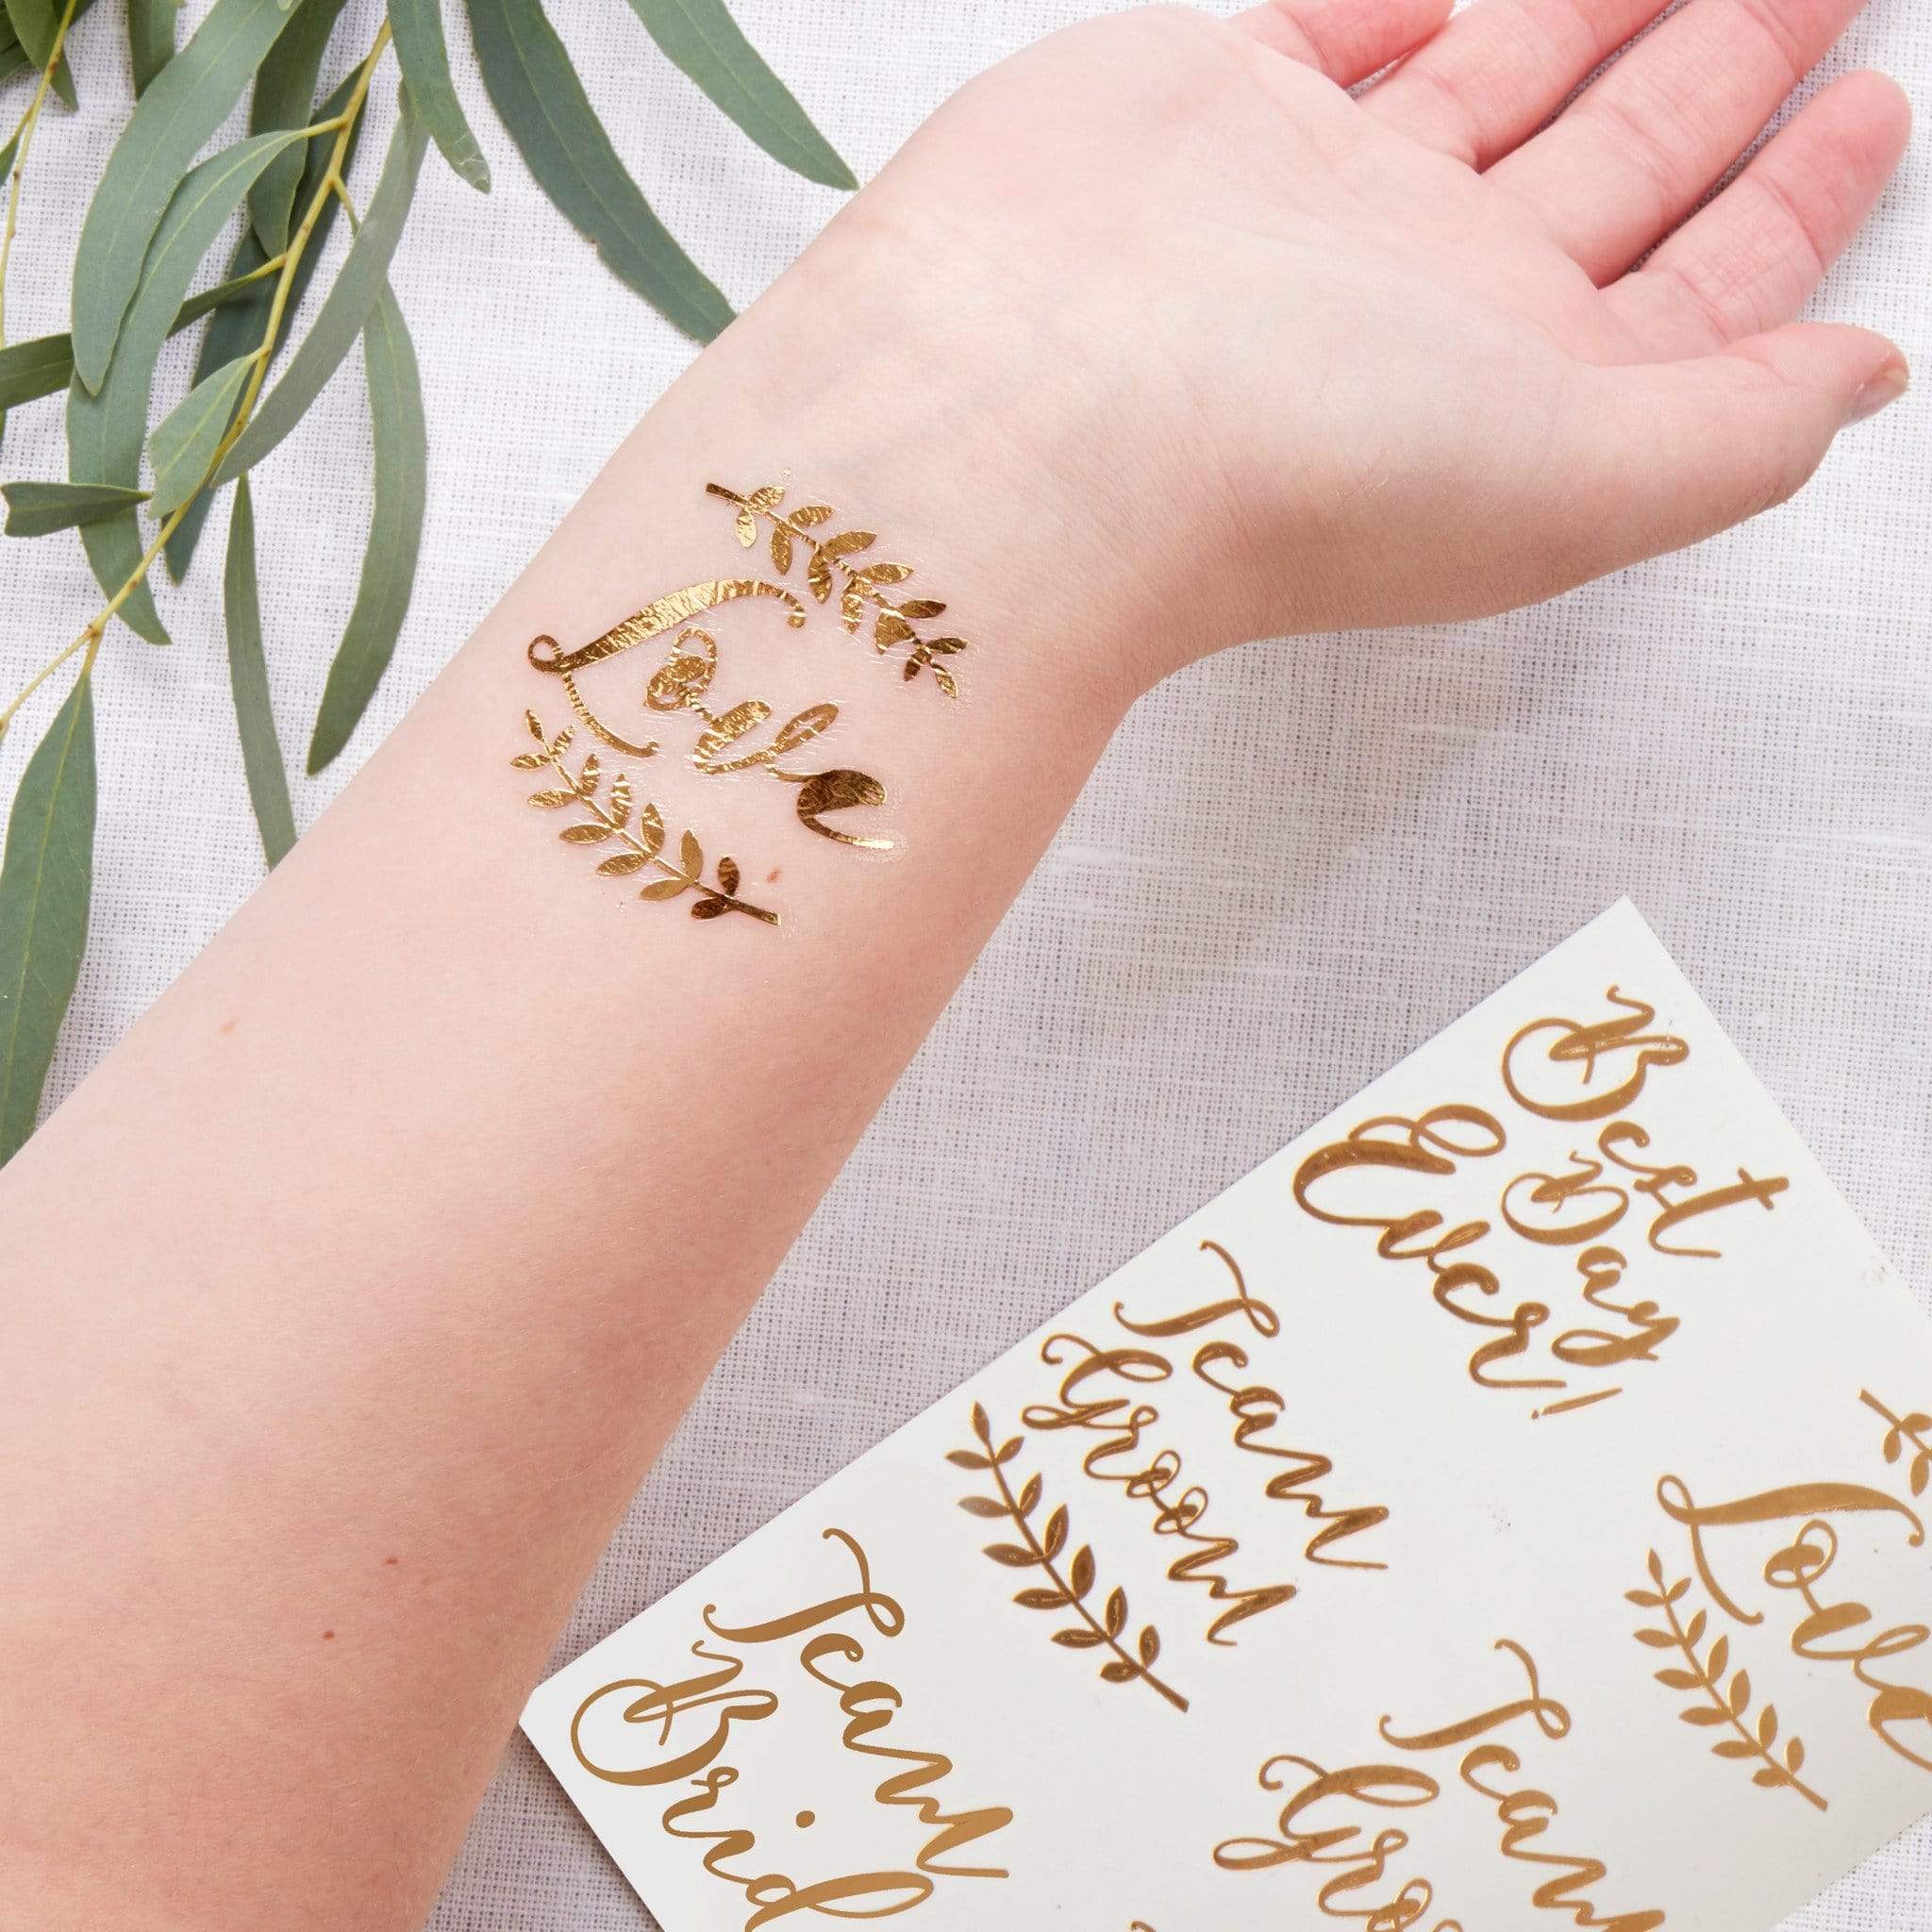 Buy 6 Sheets Temporary TattooFlash Fake Waterproof Body Tattoos Stickers  Women Wedding Party Online at Lowest Price in Ubuy India B072HJ5V4Y